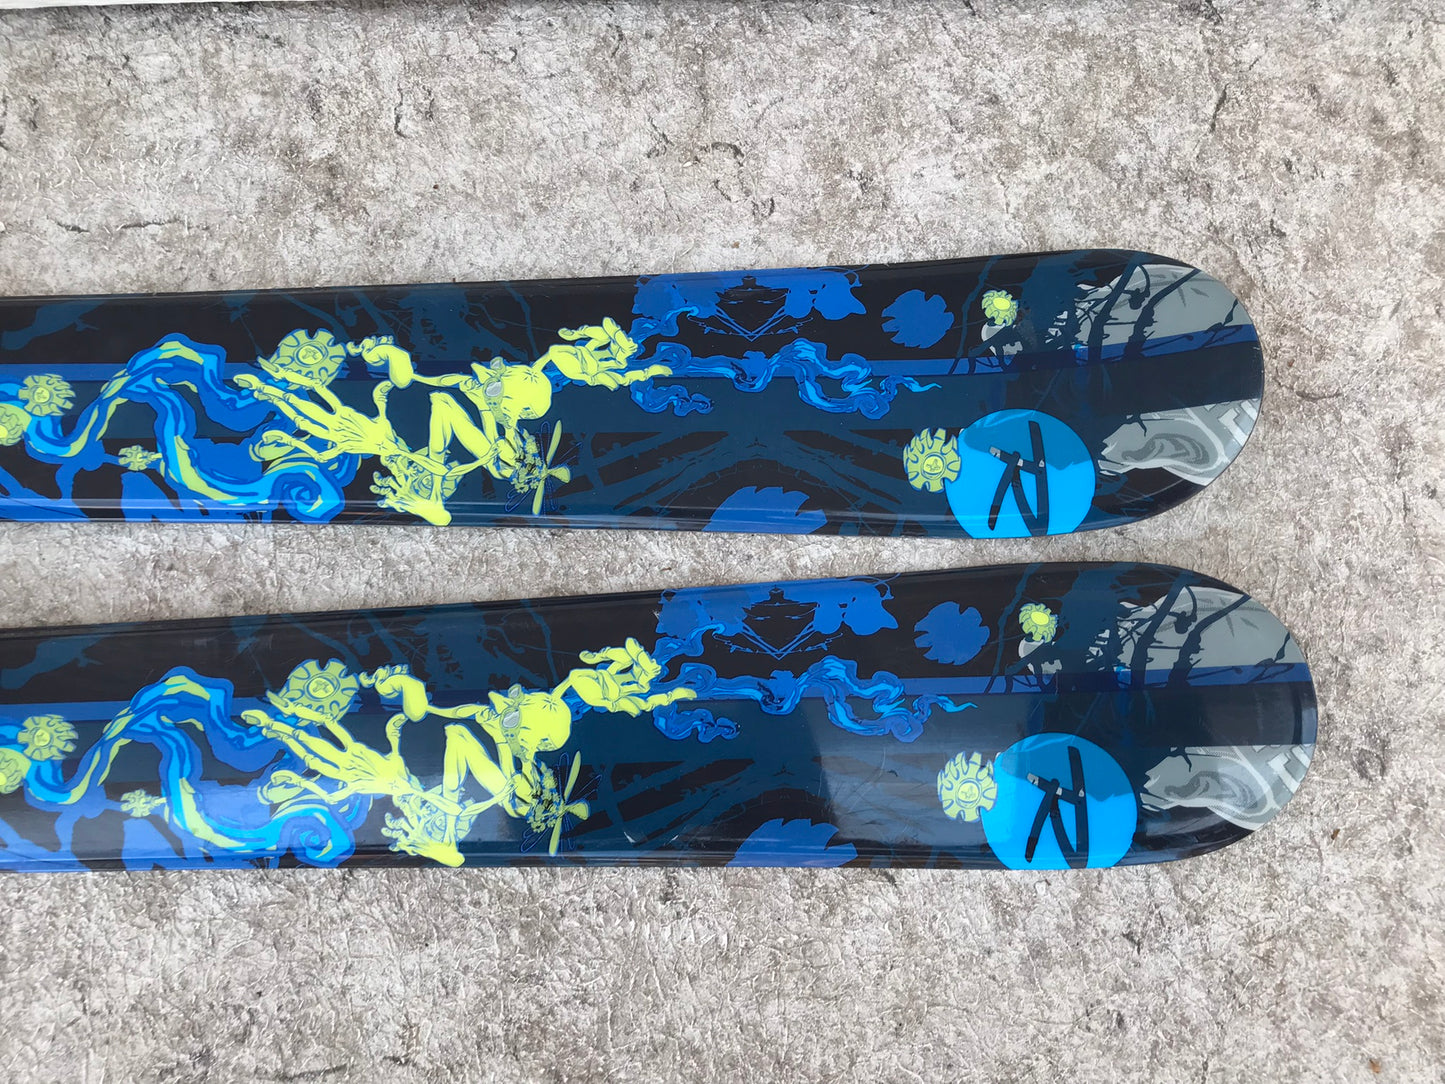 Ski 135 Rossignol Twin Tip Parabolic With Bindings Blue Lime Cartoons Outstanding Quality